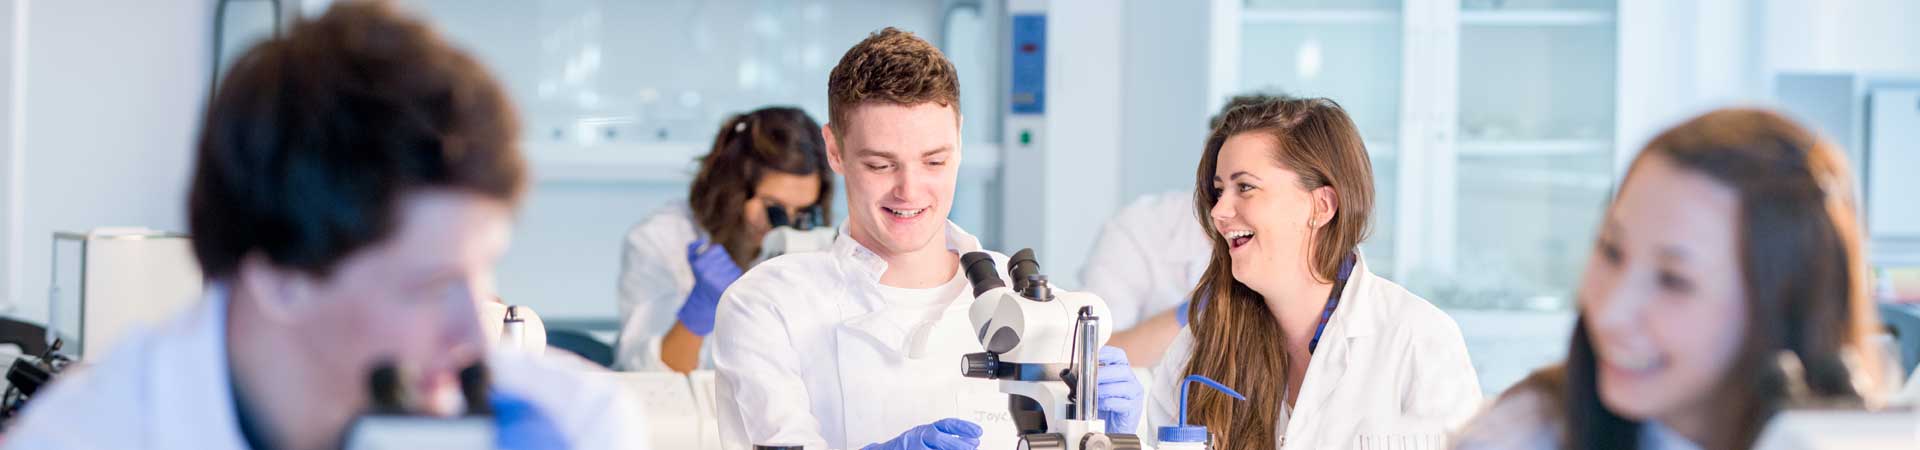 This picture shows a row on marine science students in lab coats in a teaching laboratory having fun with microscopes